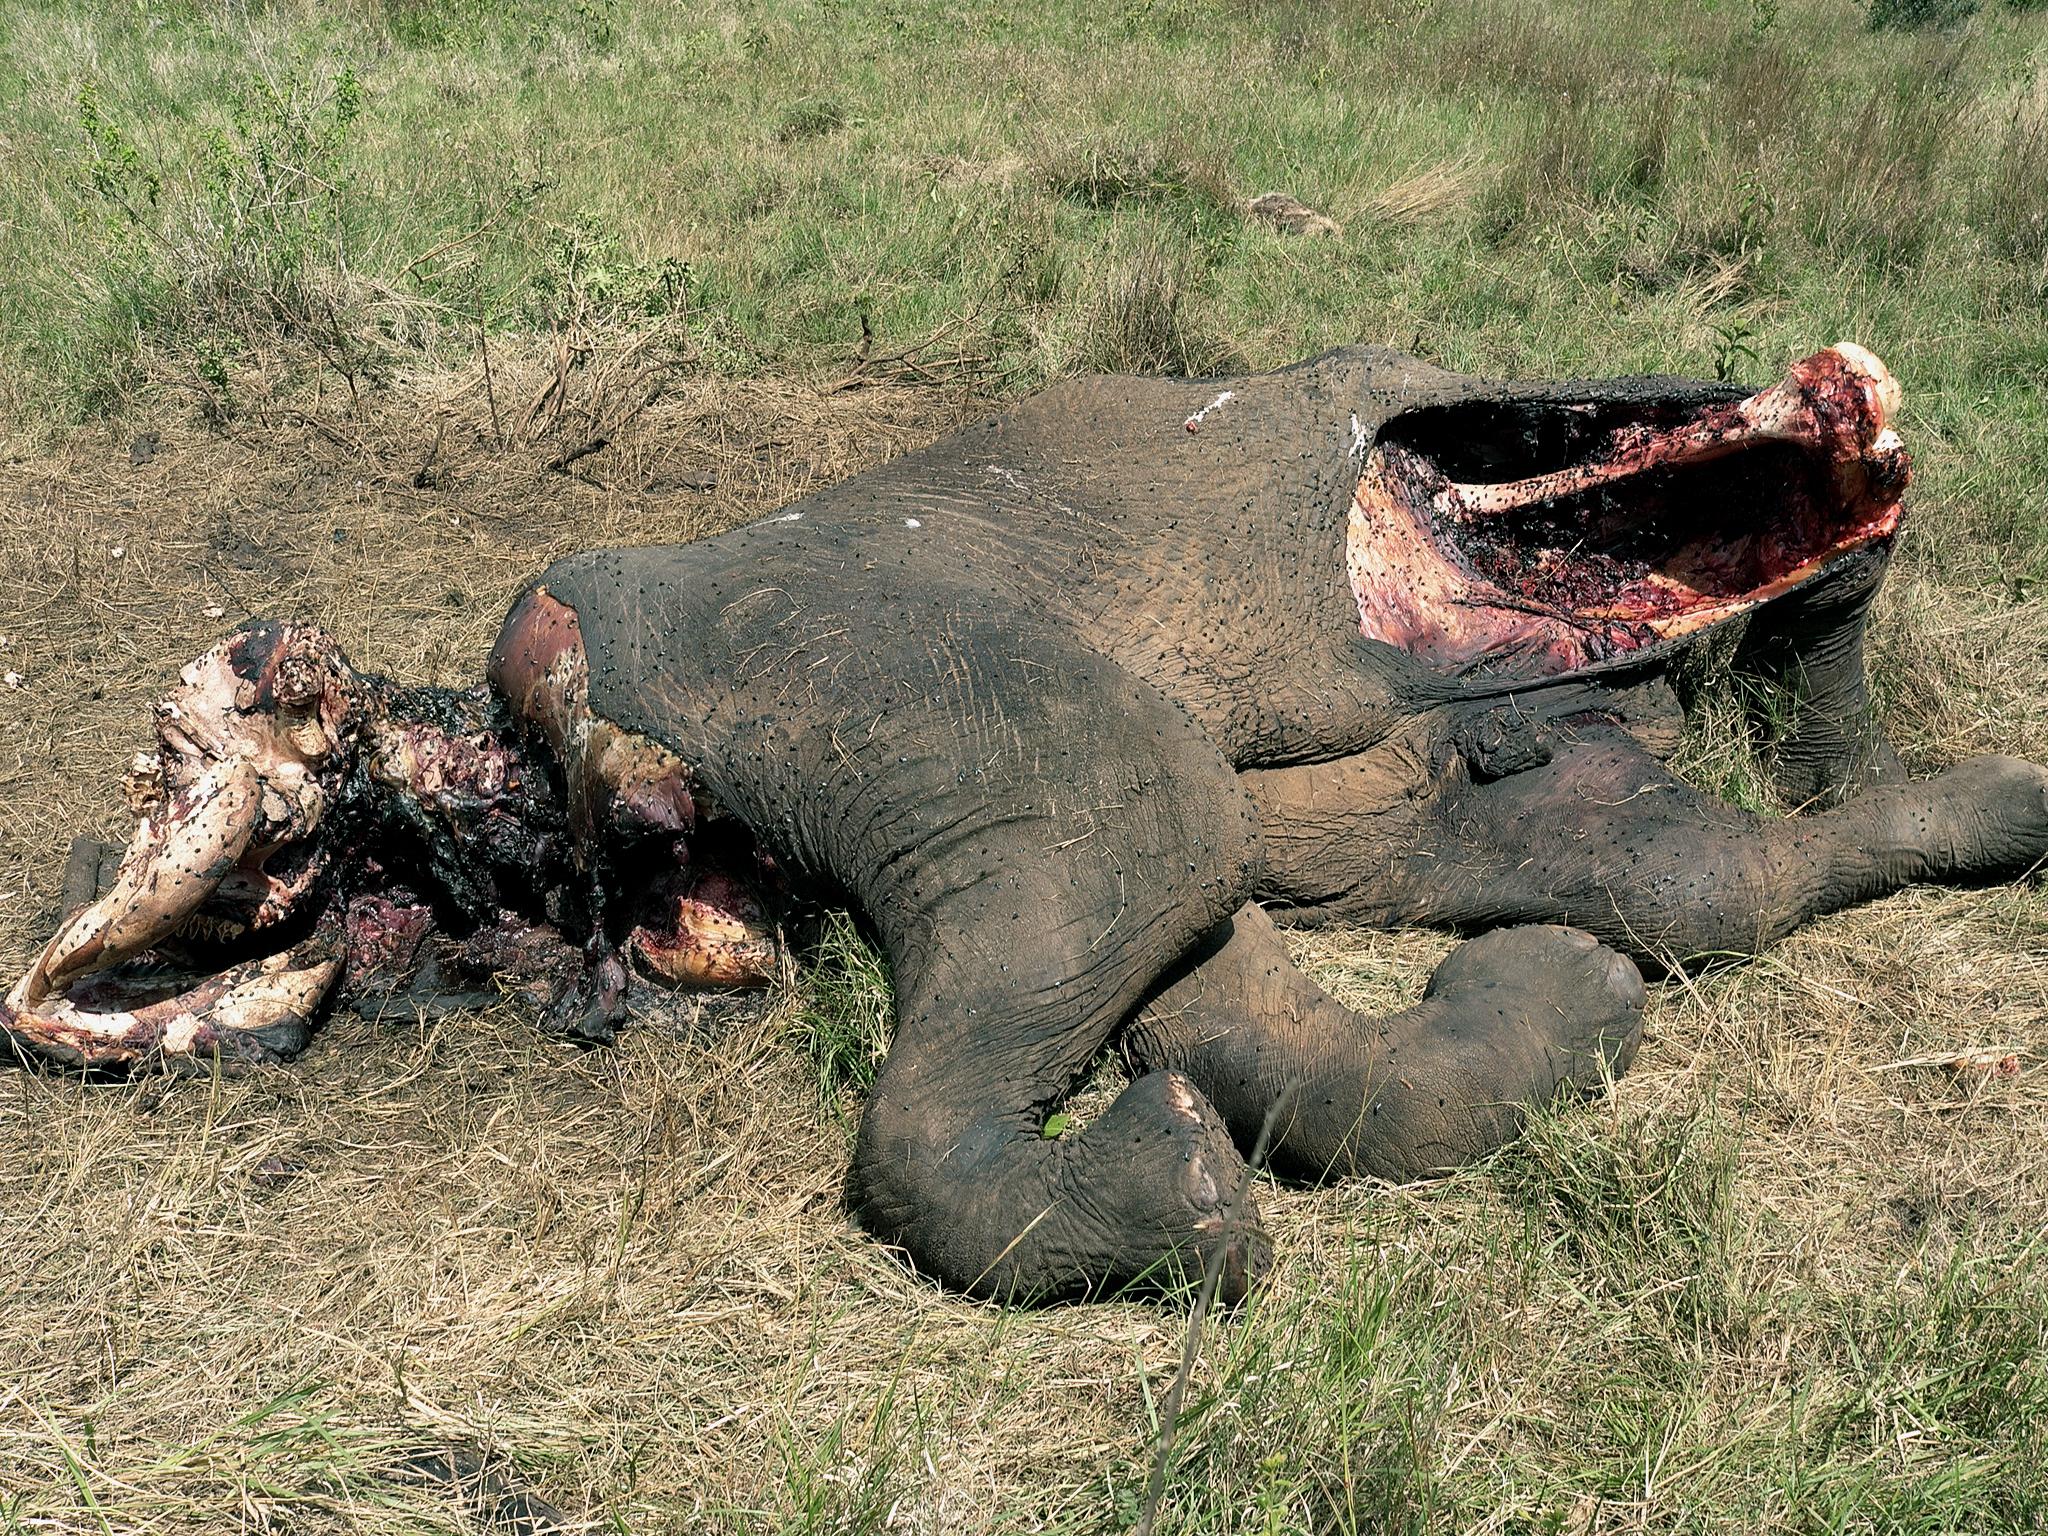 When poachers kill elephants they do so in the most brutal manner, using machetes or even chainsaws to extract the ivory. More than 100,000 elephants have been killed over a three year period.